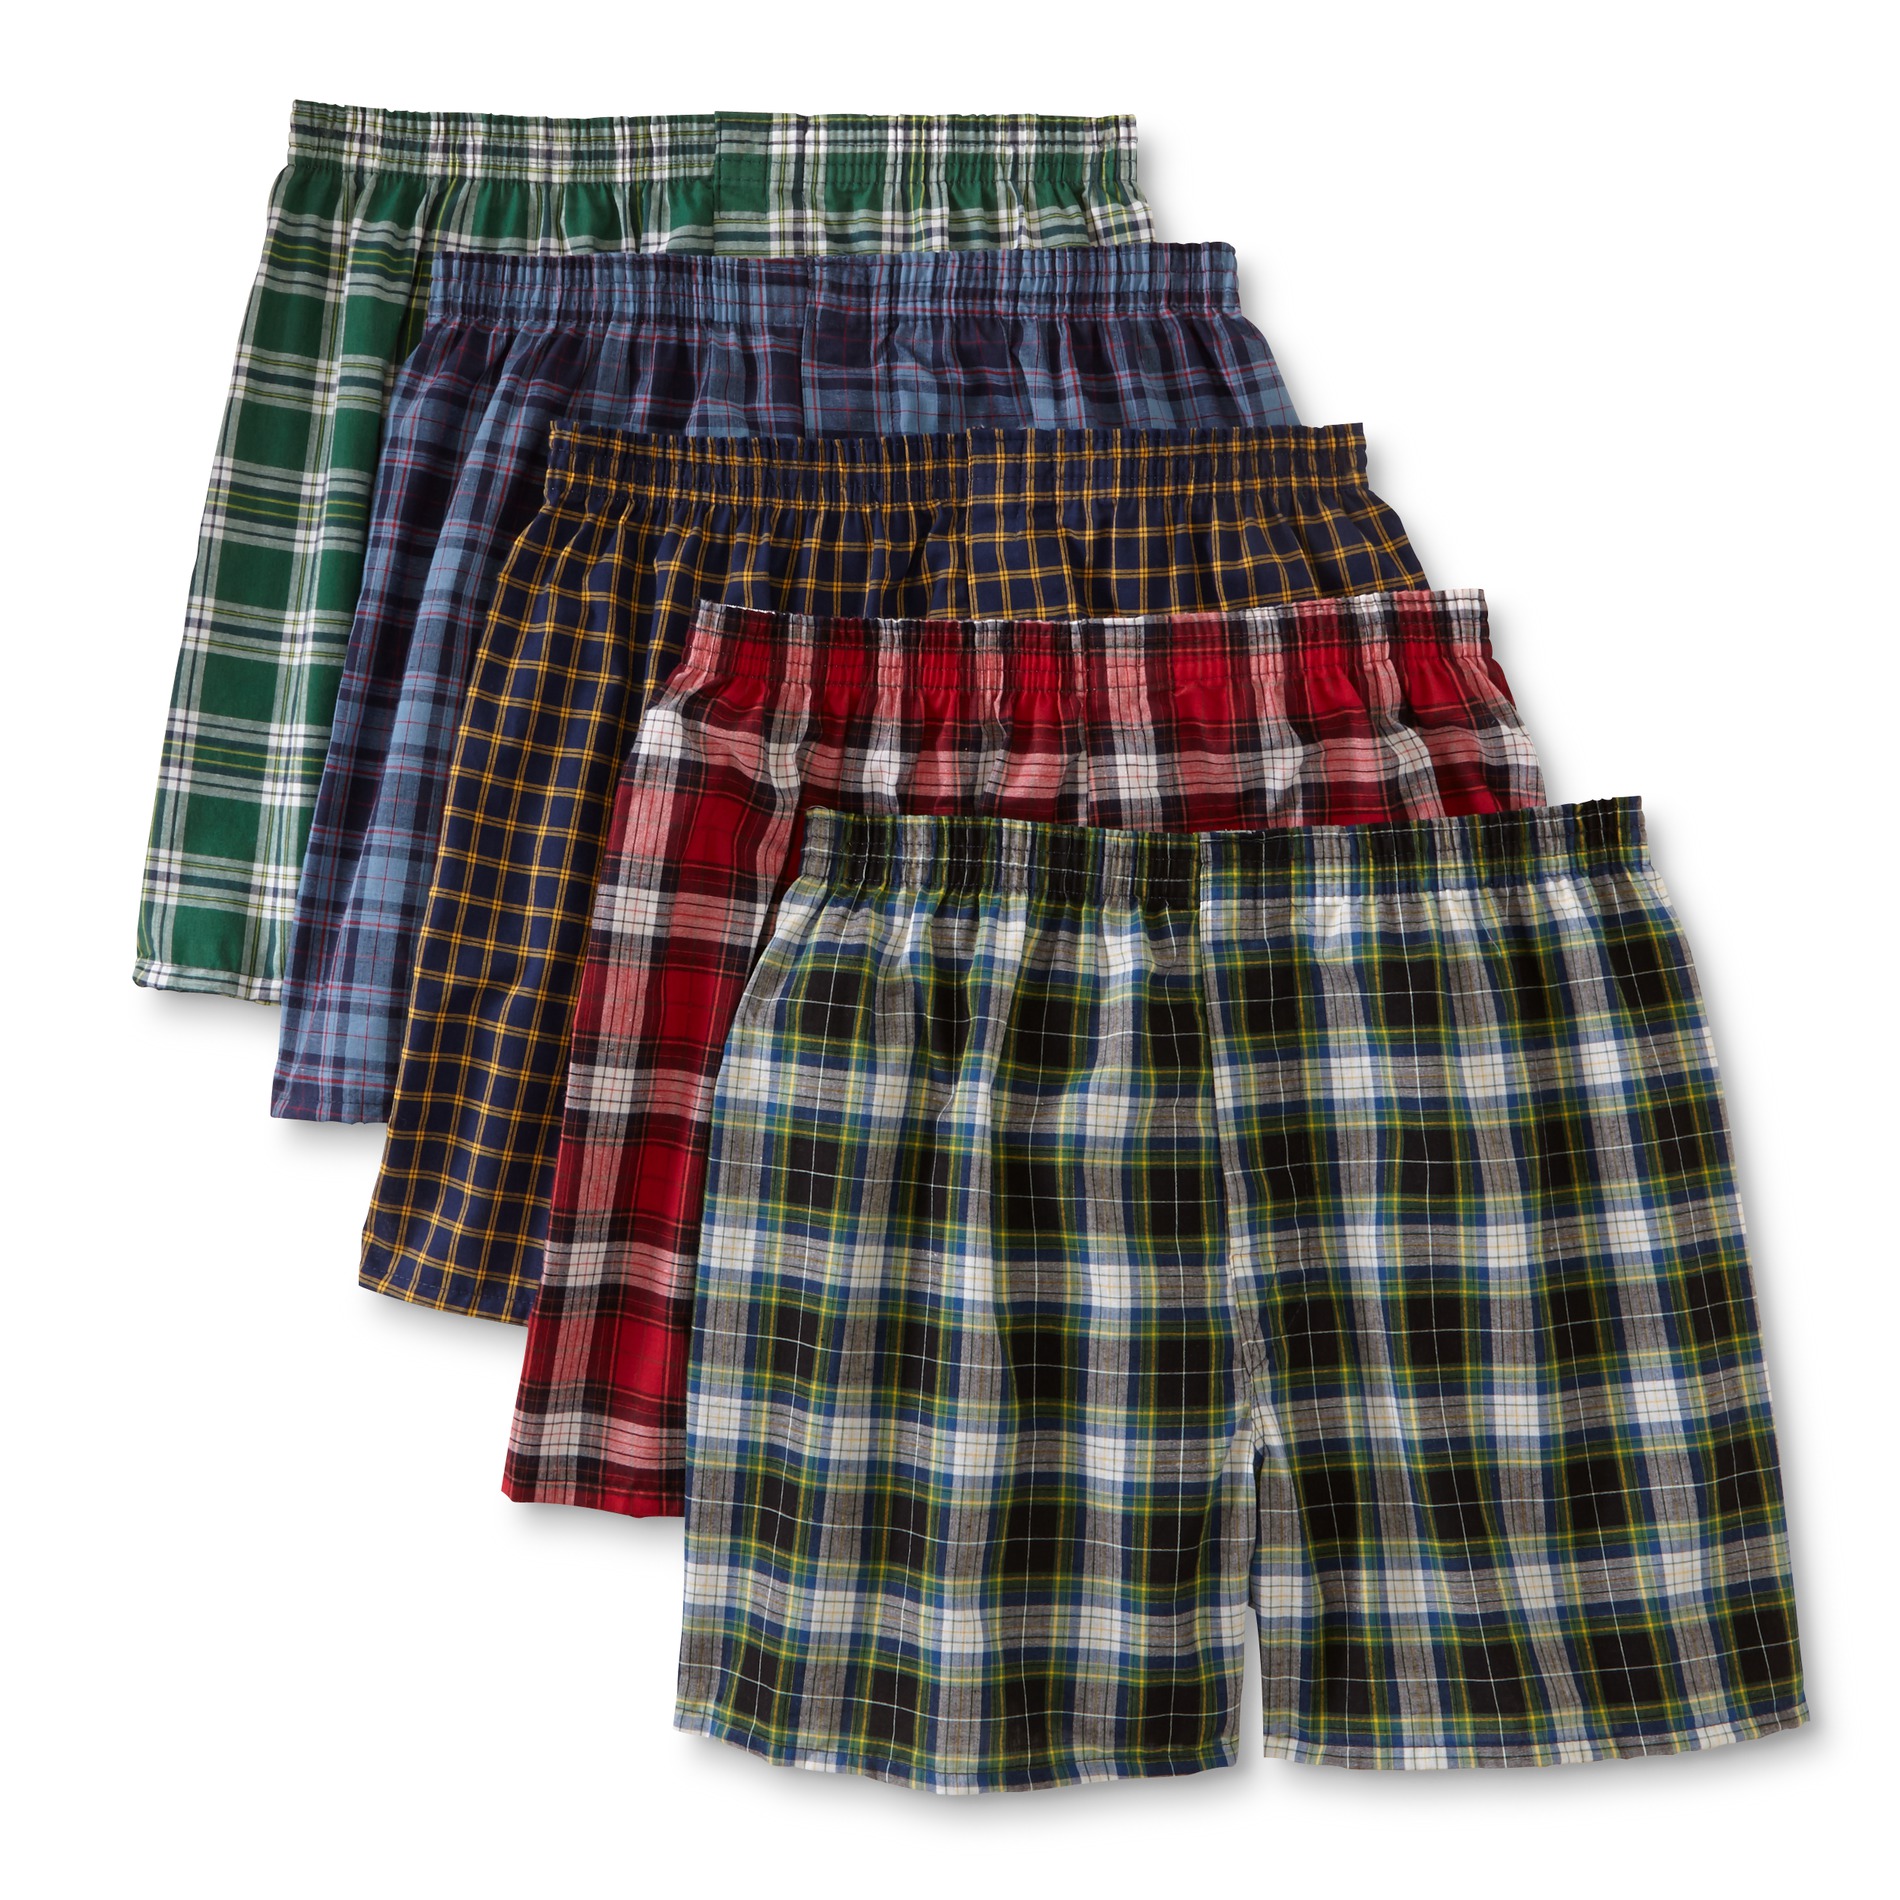 Fruit of the Loom Men's 7-Pairs Boxer Shorts - Plaid